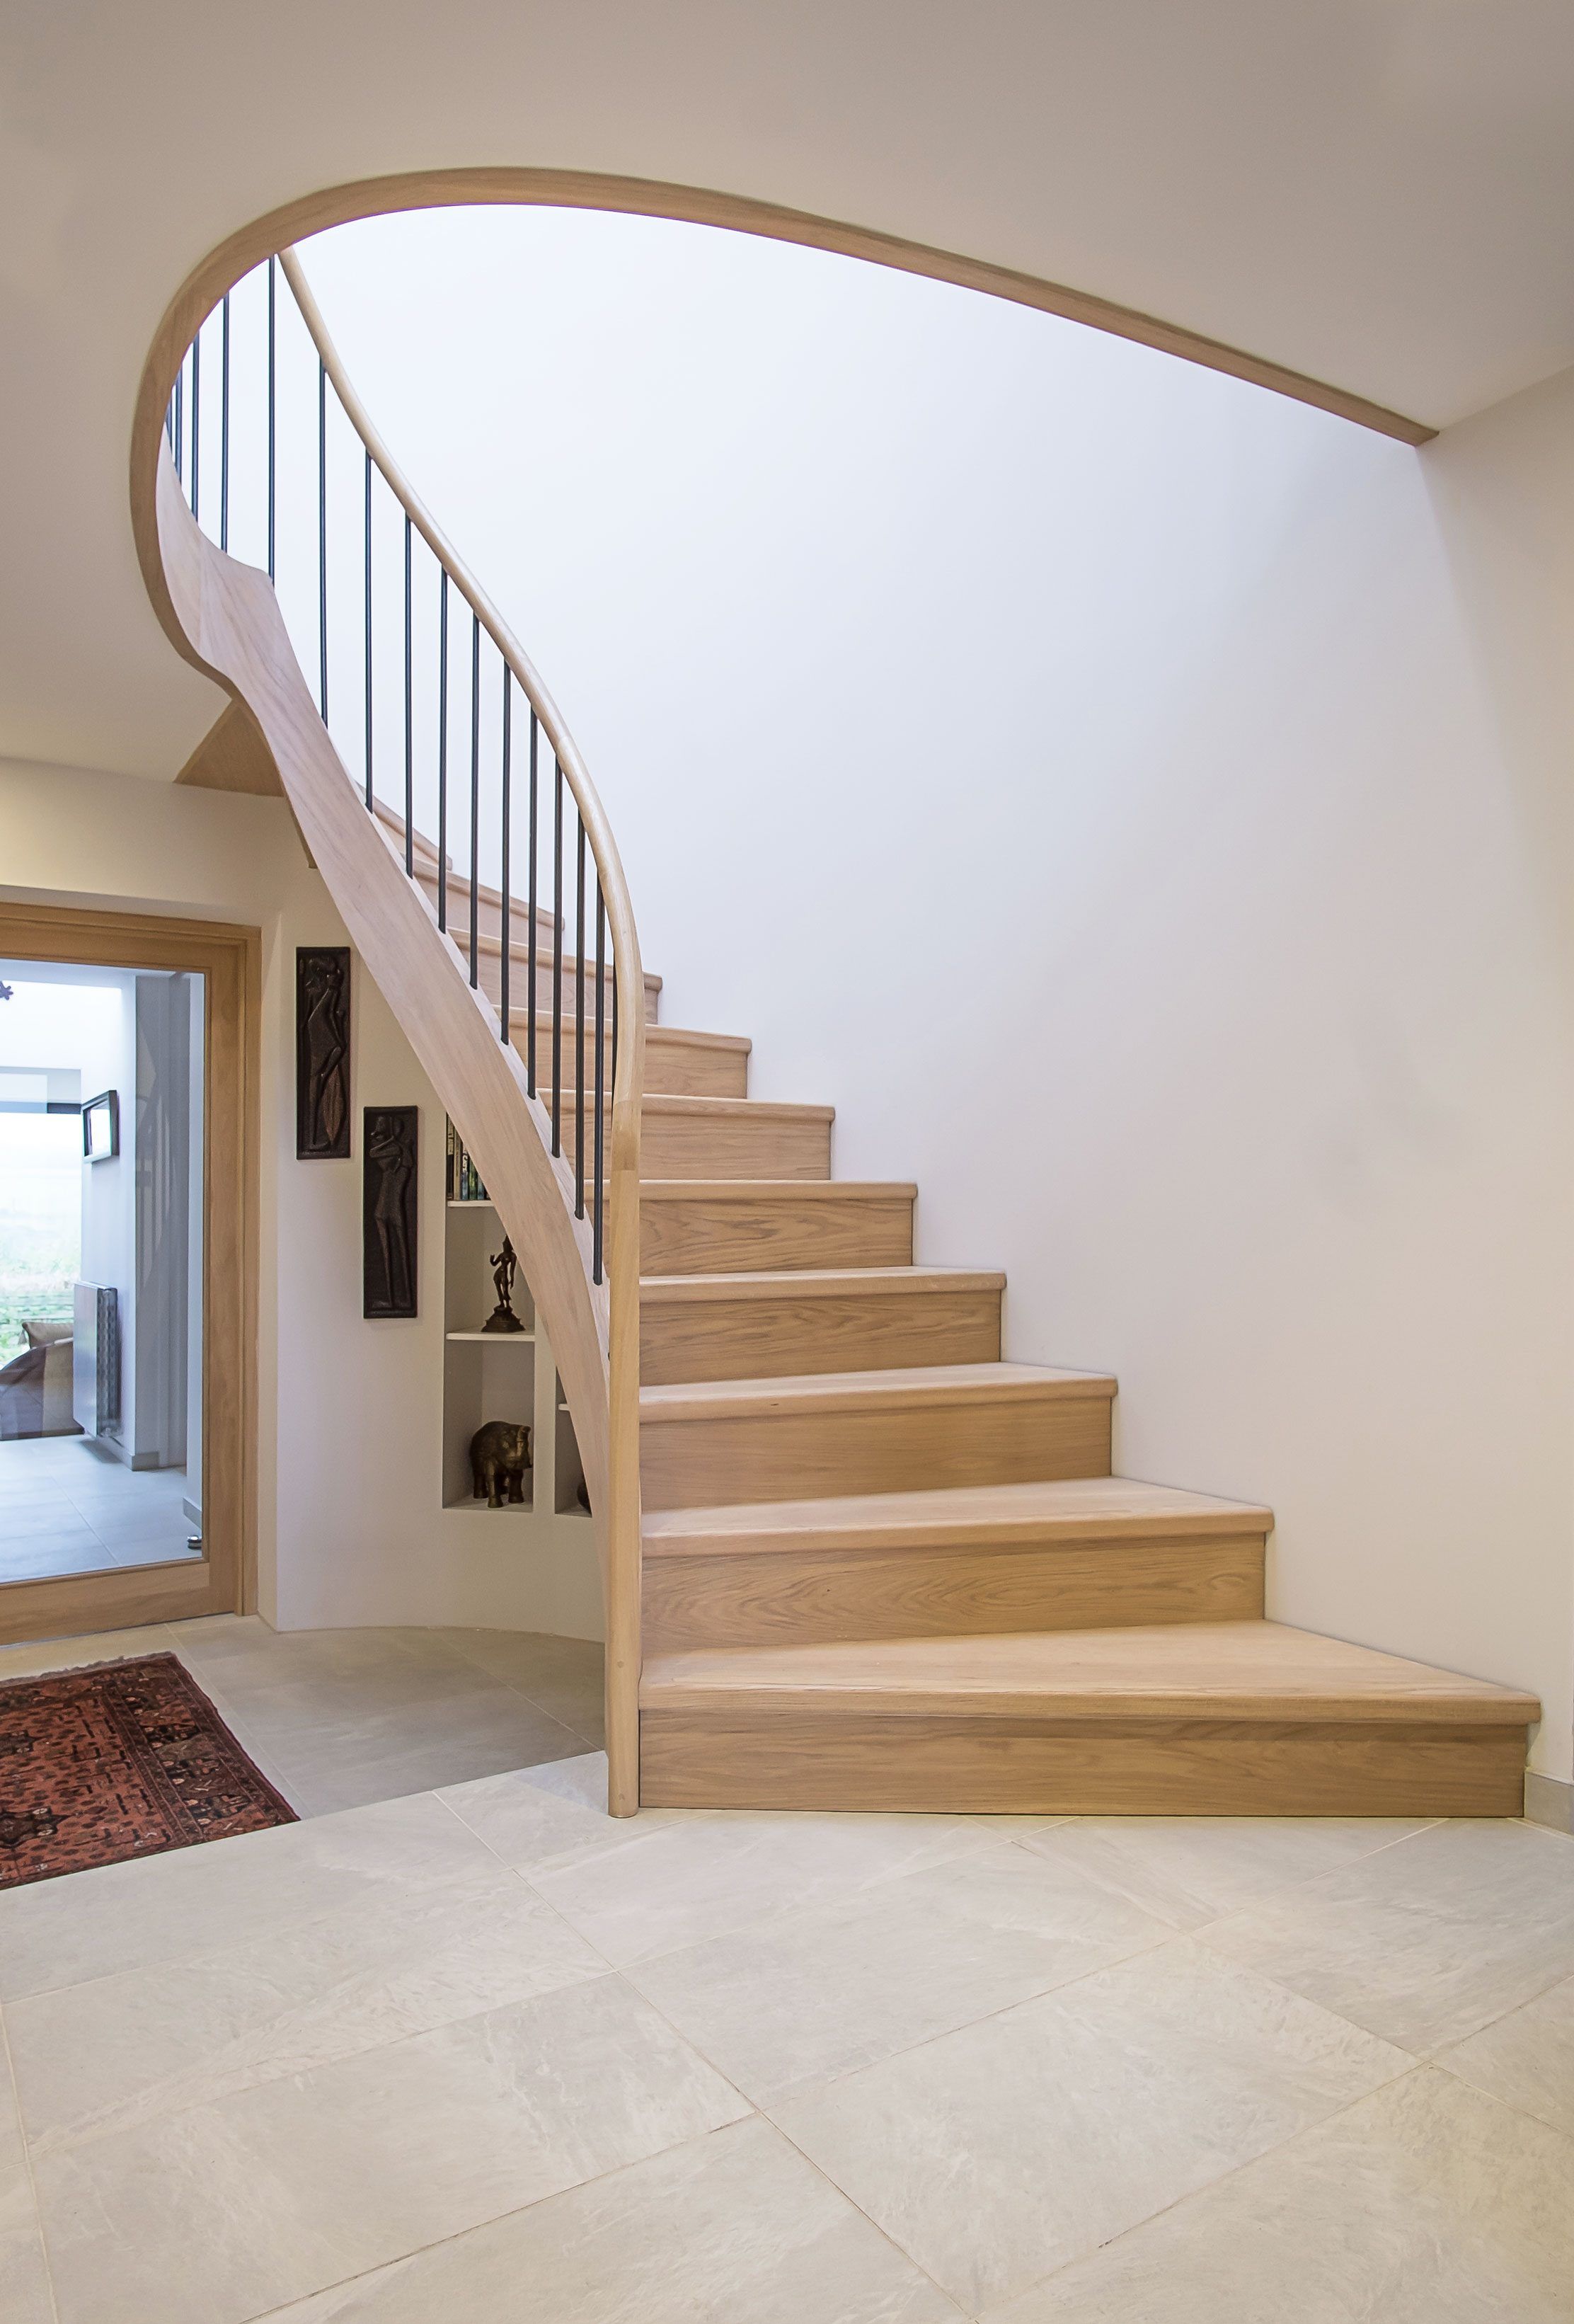 Ground floor view of feature Elliptical oak stair with iron balustrade and oak handrail. Tiled floors, rug, glazed oak doors and storage..